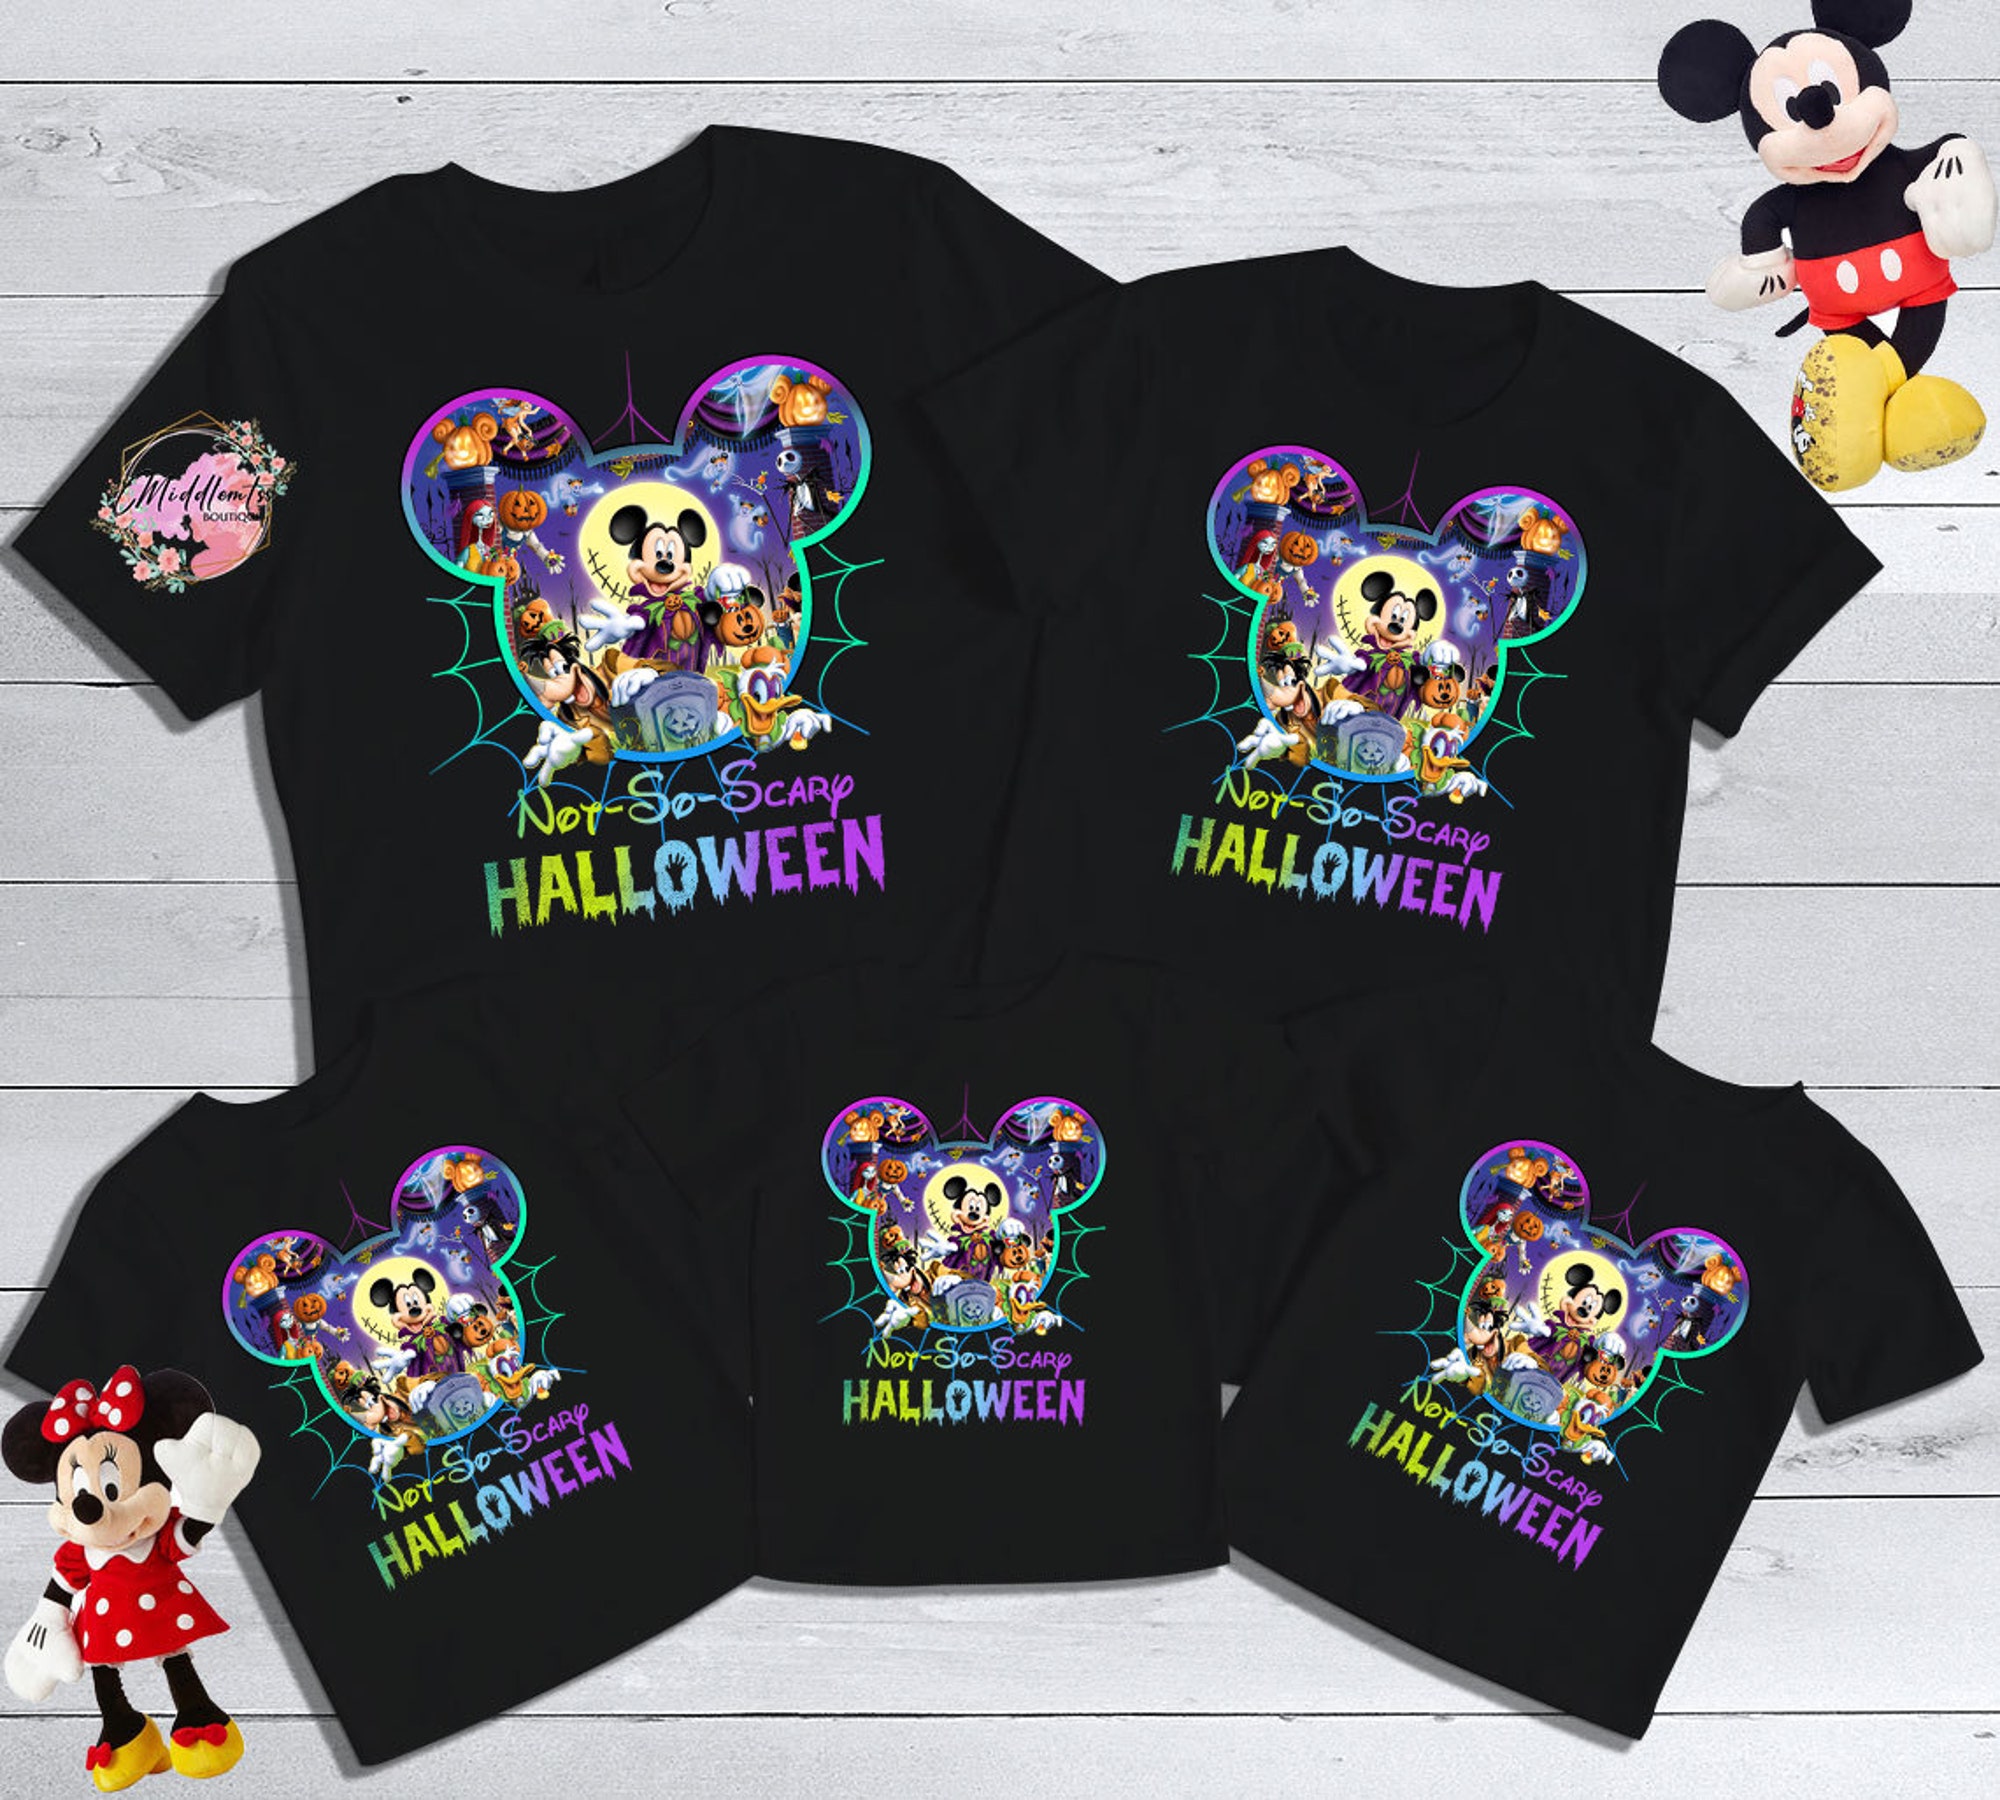 Discover Mickey's Not so scary Halloween party 2022 Matching T-Shirt